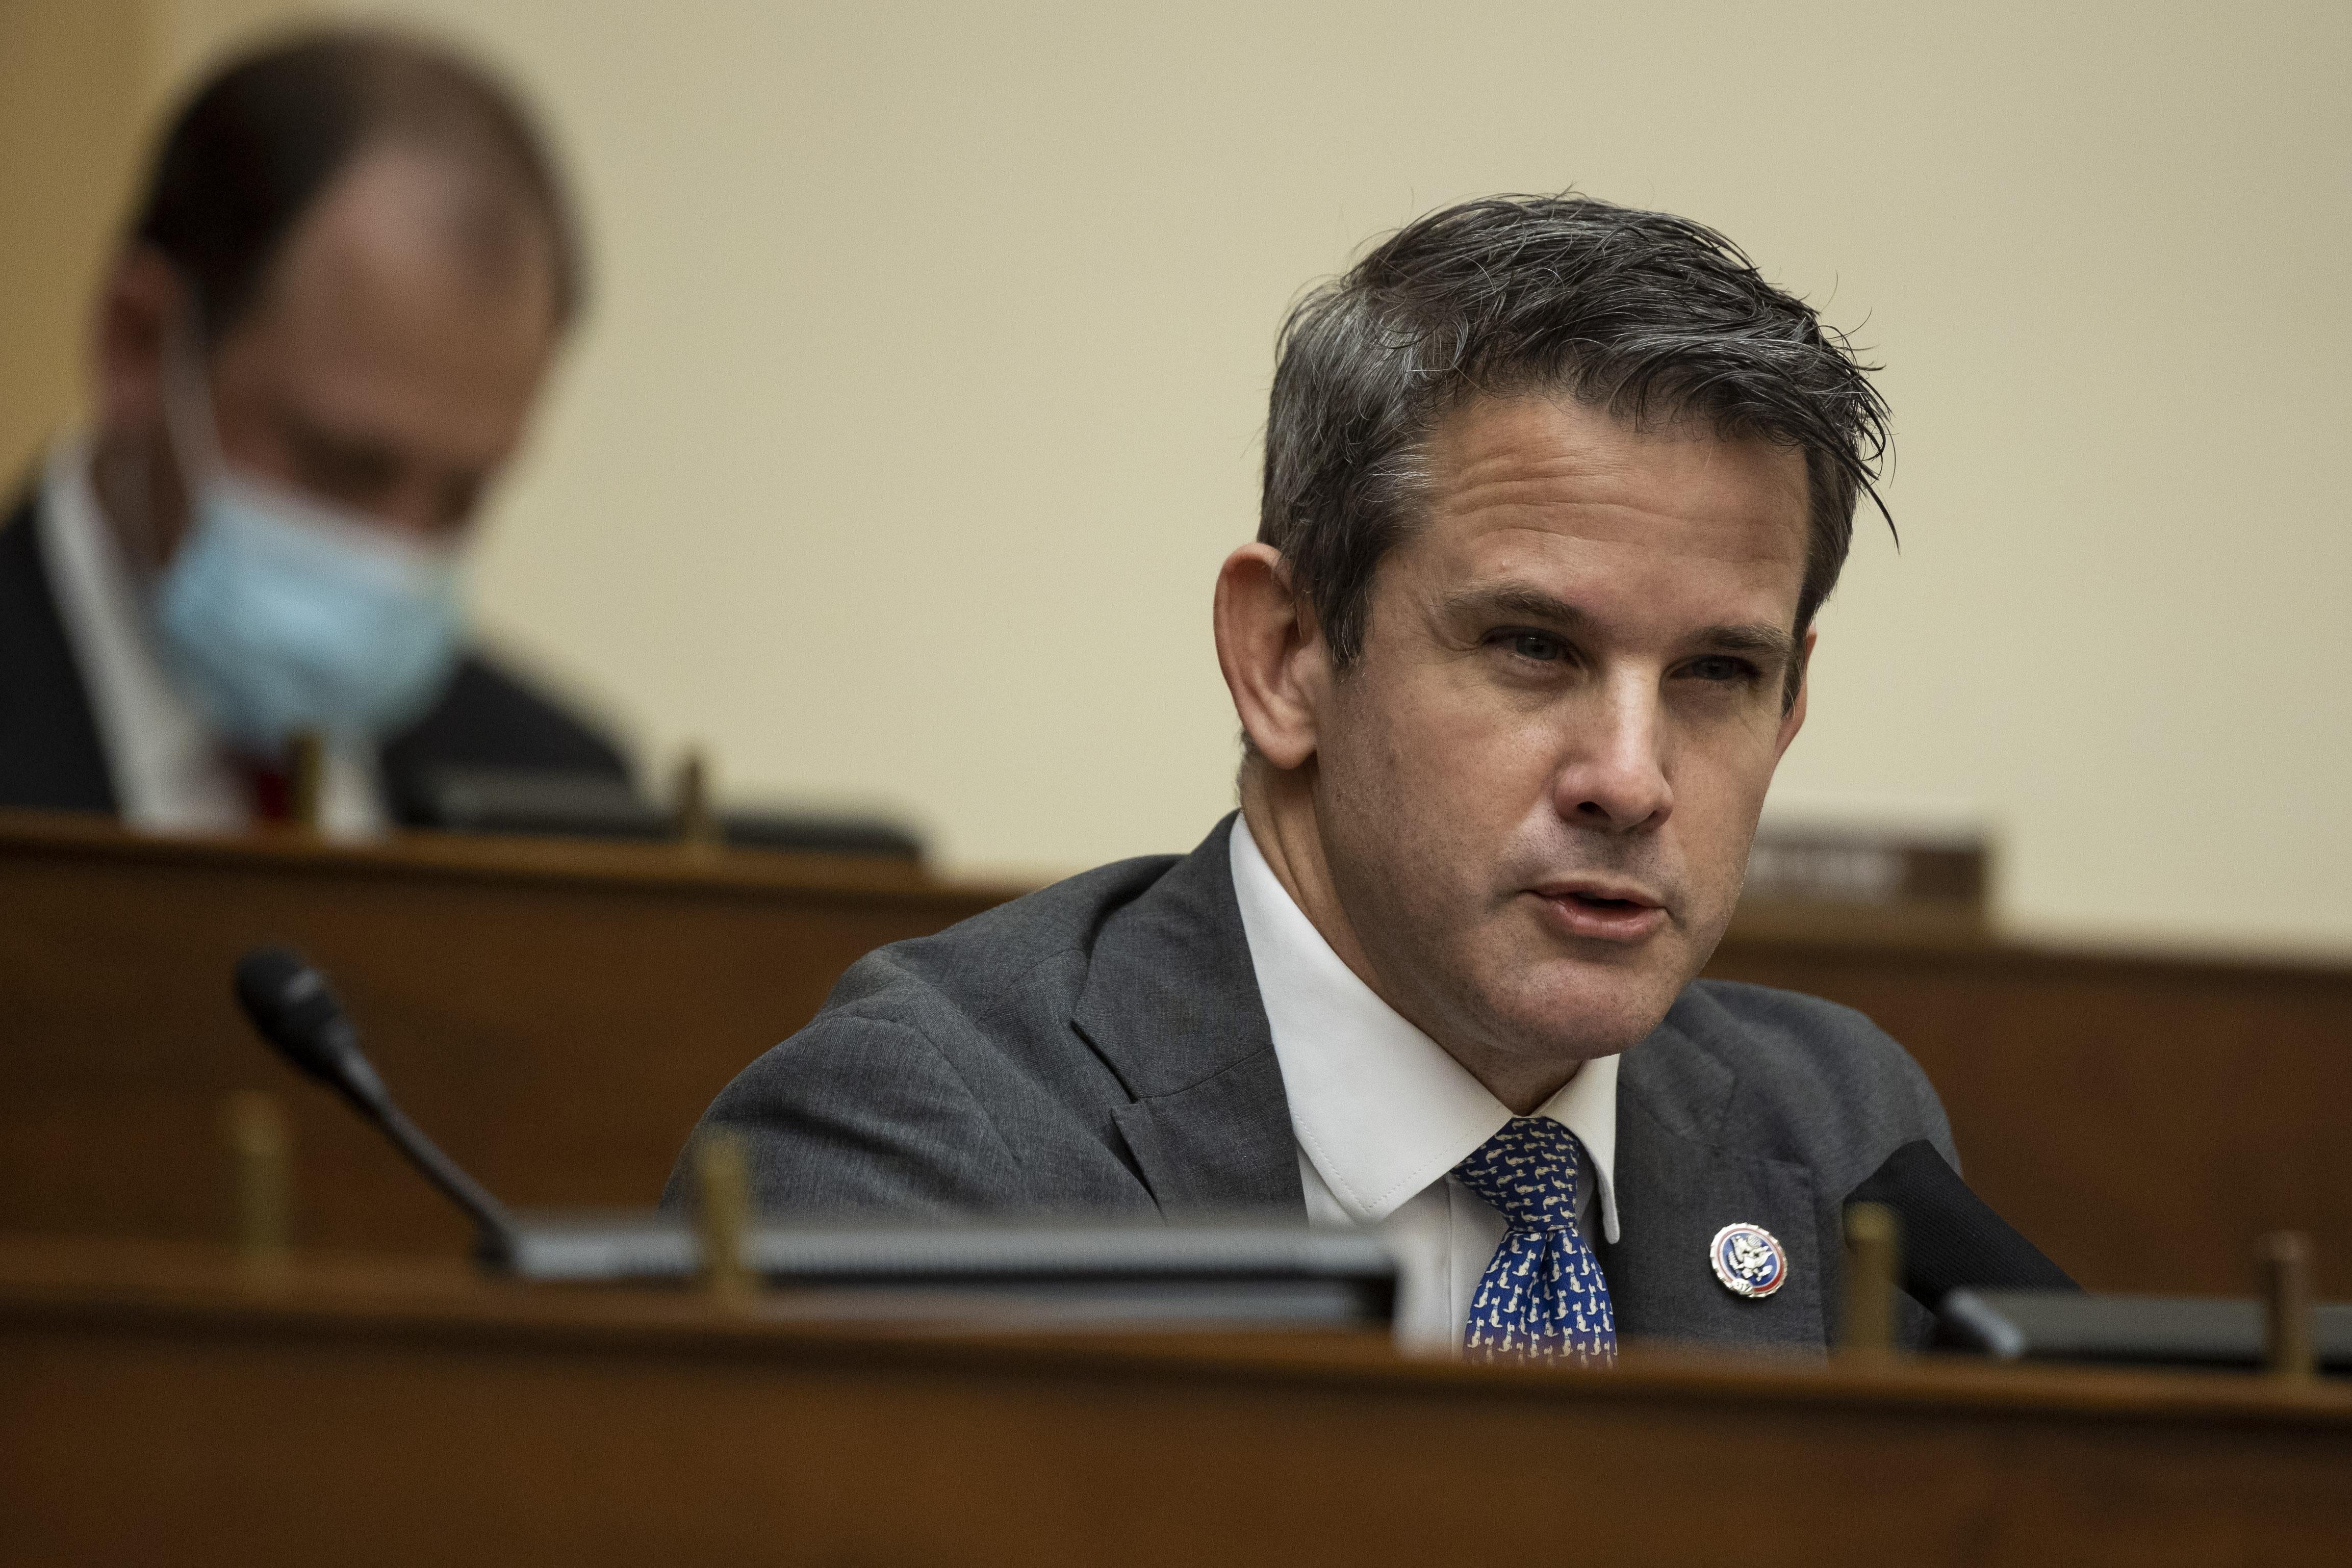 Rep. Adam Kinzinger speaks as Secretary of State Antony Blinken testifies before the House Committee On Foreign Affairs March 10, 2021 on Capitol Hill in Washington, D.C.